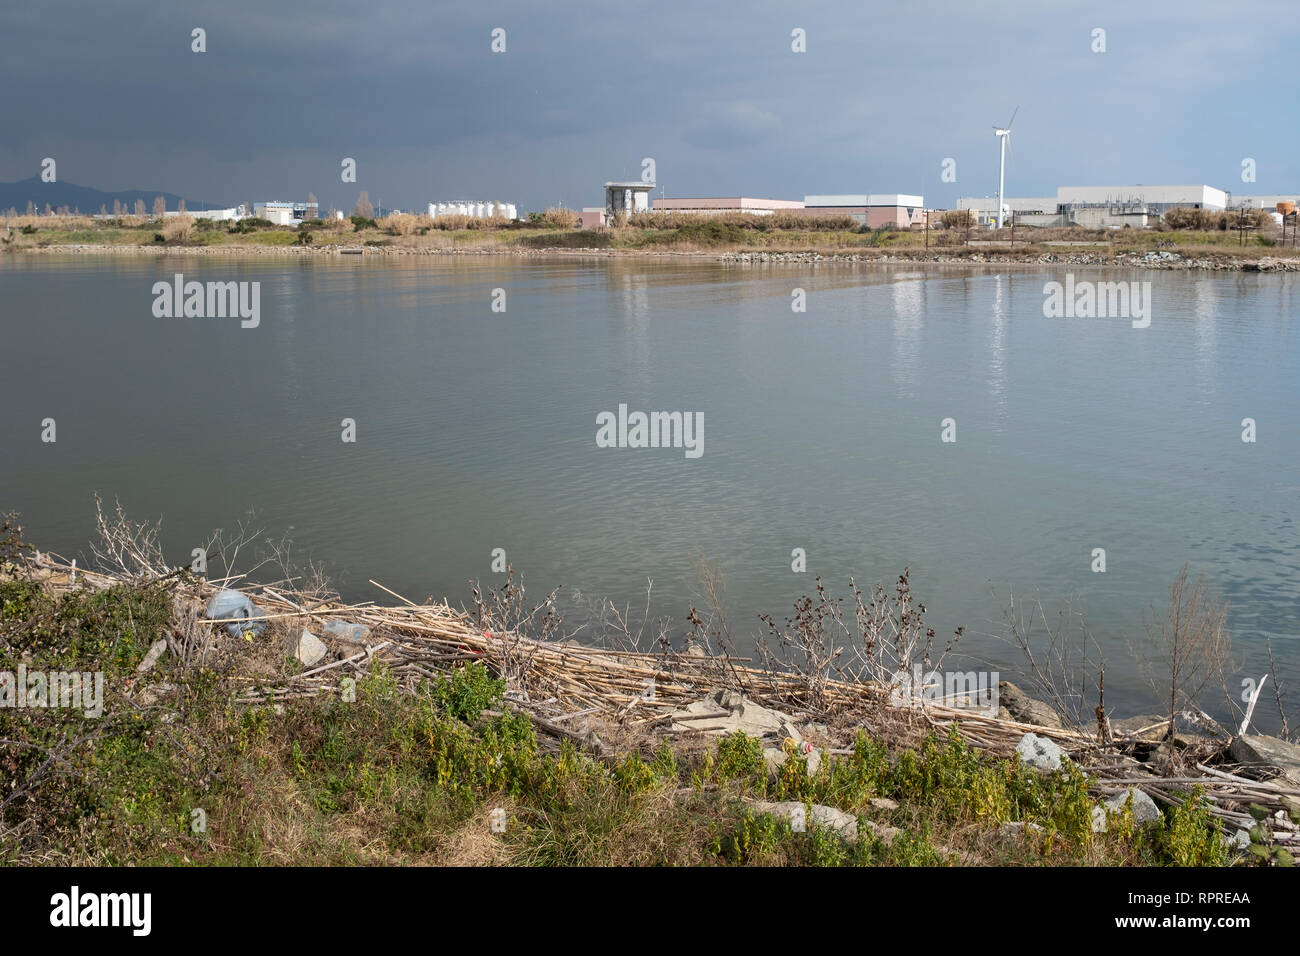 Llobregat River with industrial area in background and plastic bottles in the foreground. Natural Areas of the Llobregat Delta. Catalonia. Spain. Stock Photo